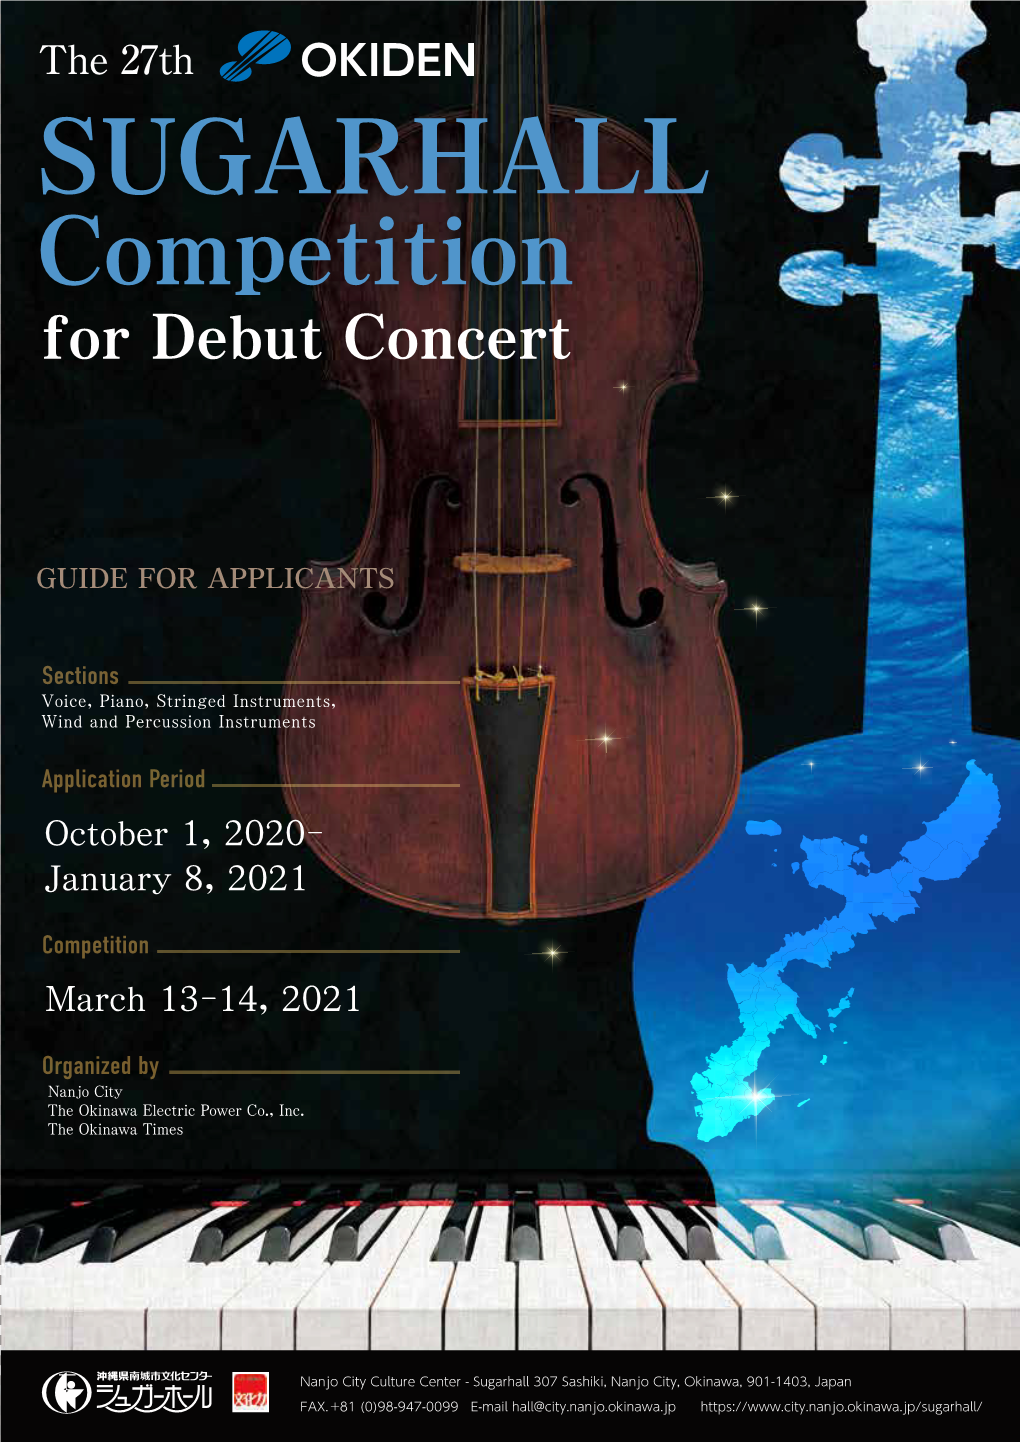 SUGARHALL Competition for Debut Concert